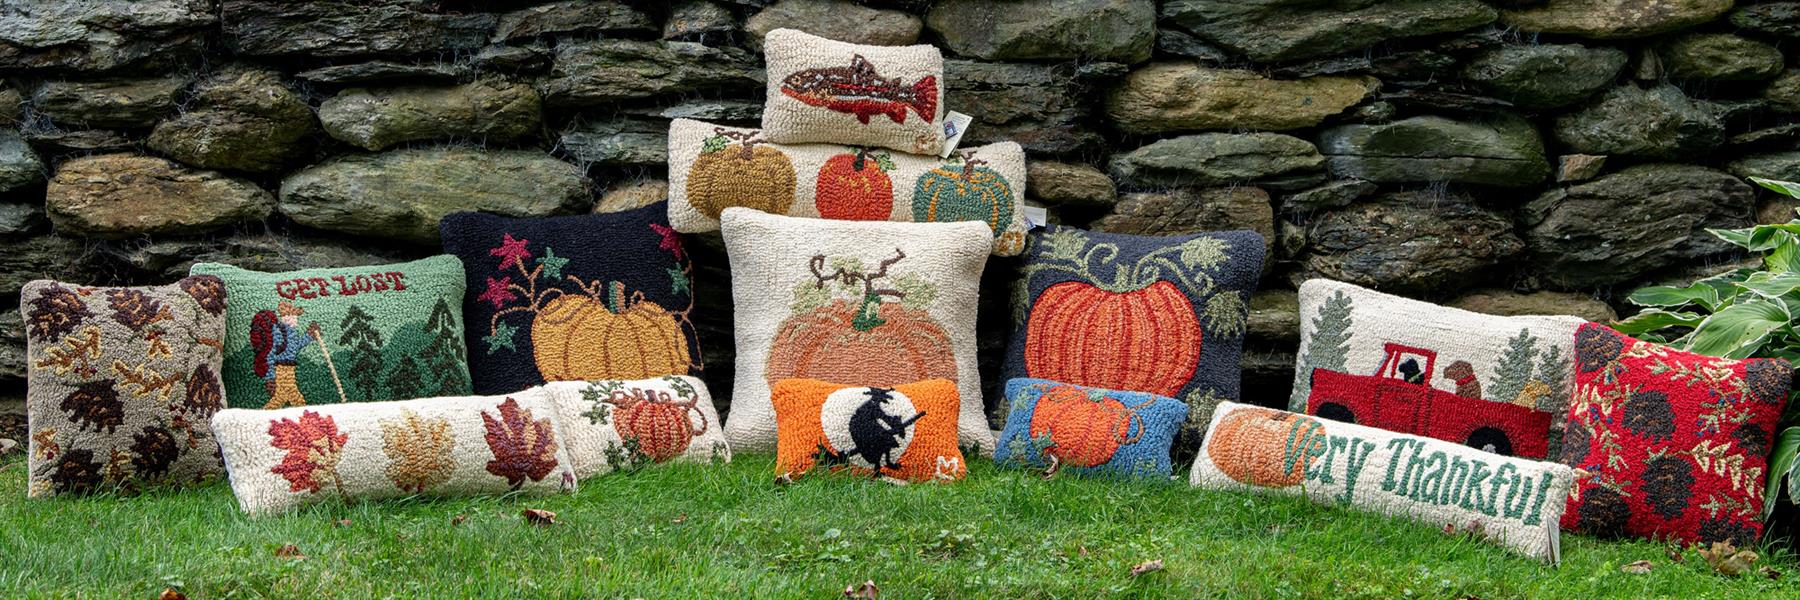 Decorate your home for fall